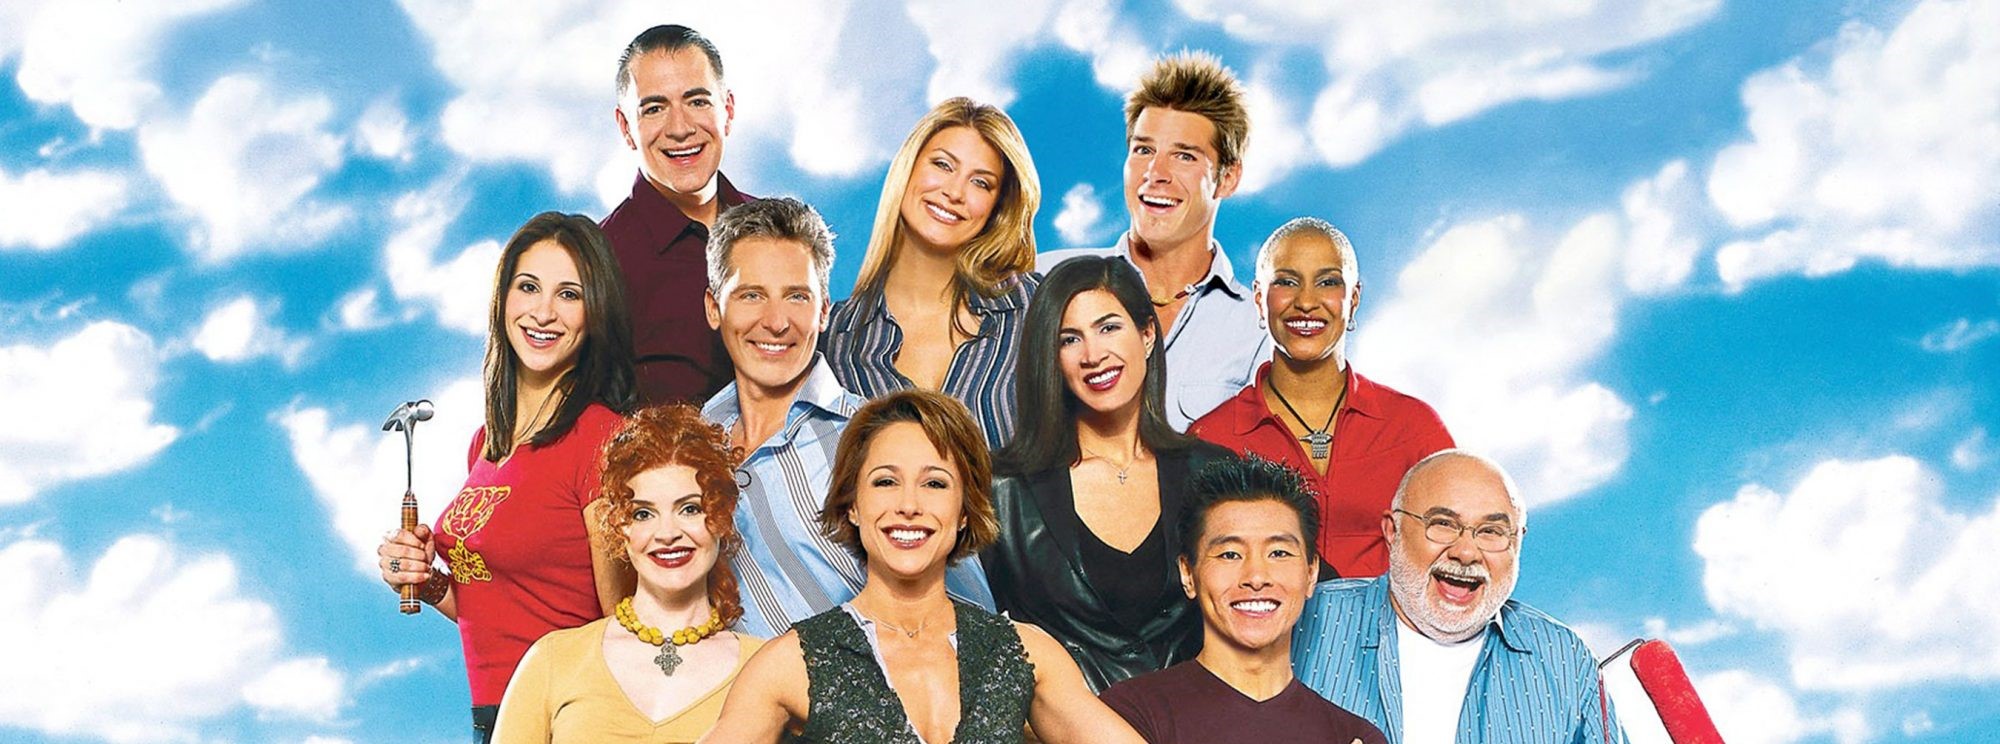 Trading Spaces: Where Are The Participants Now?